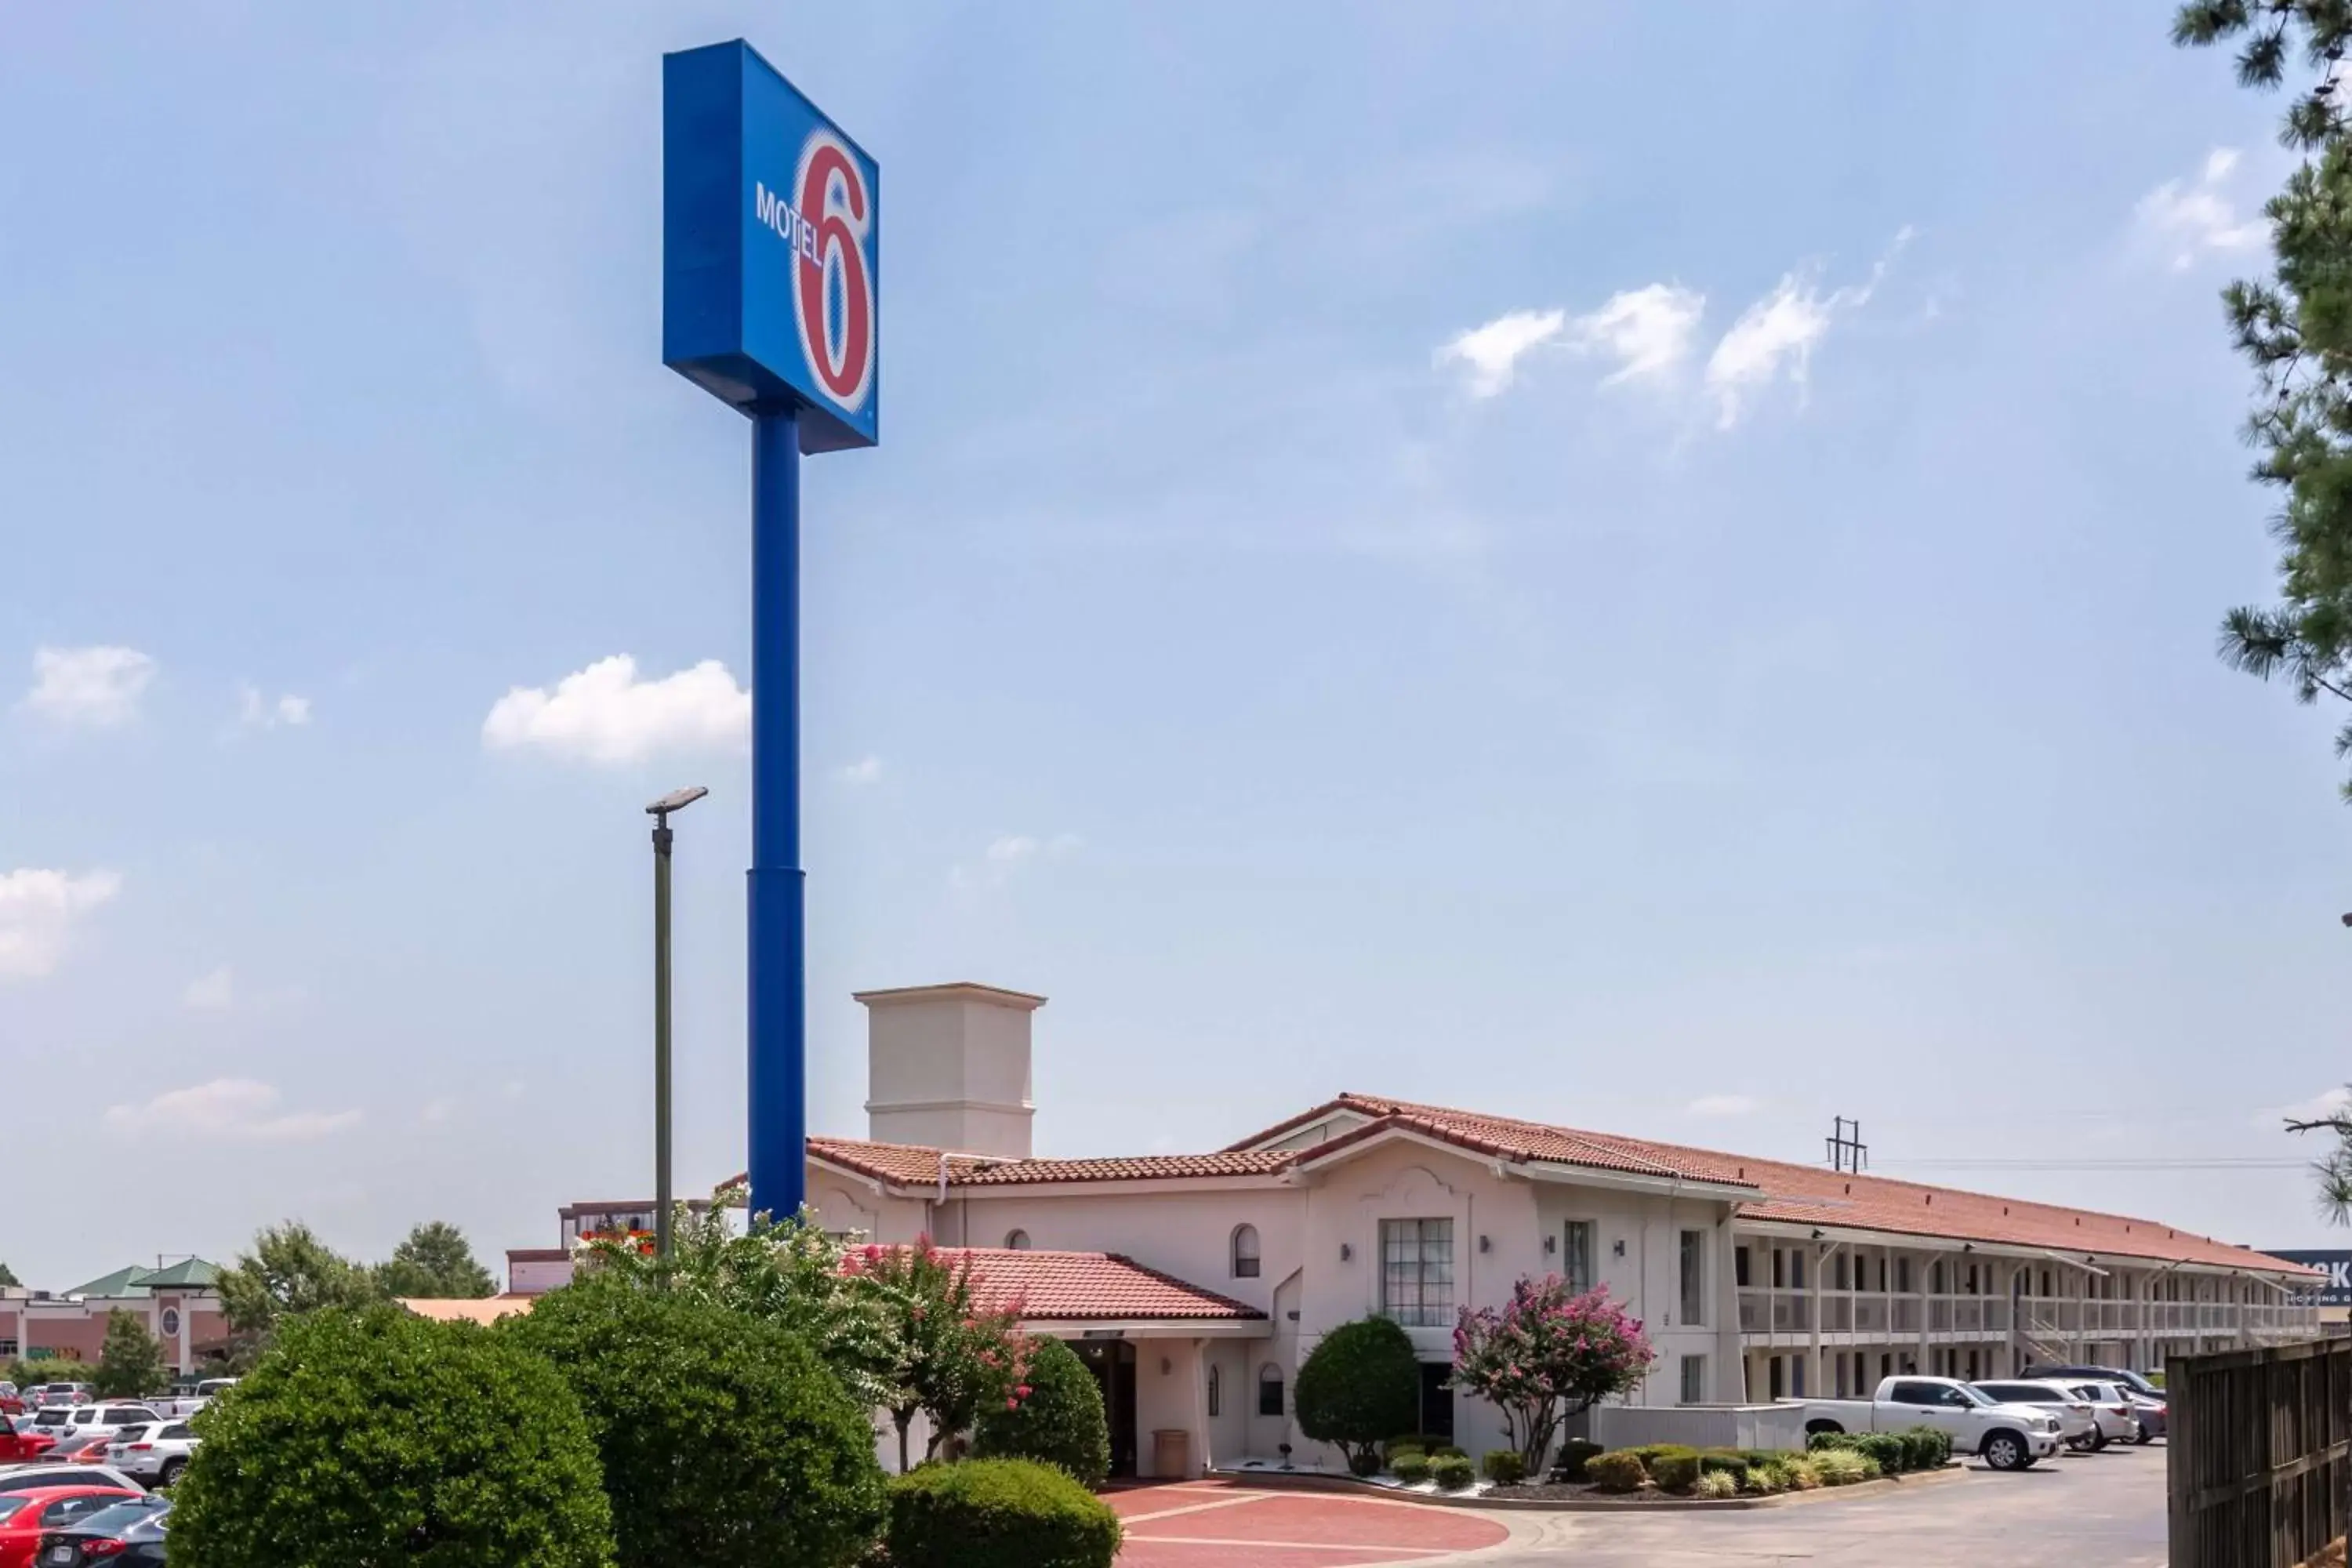 Property Building in Motel 6-North Little Rock, AR - McCain